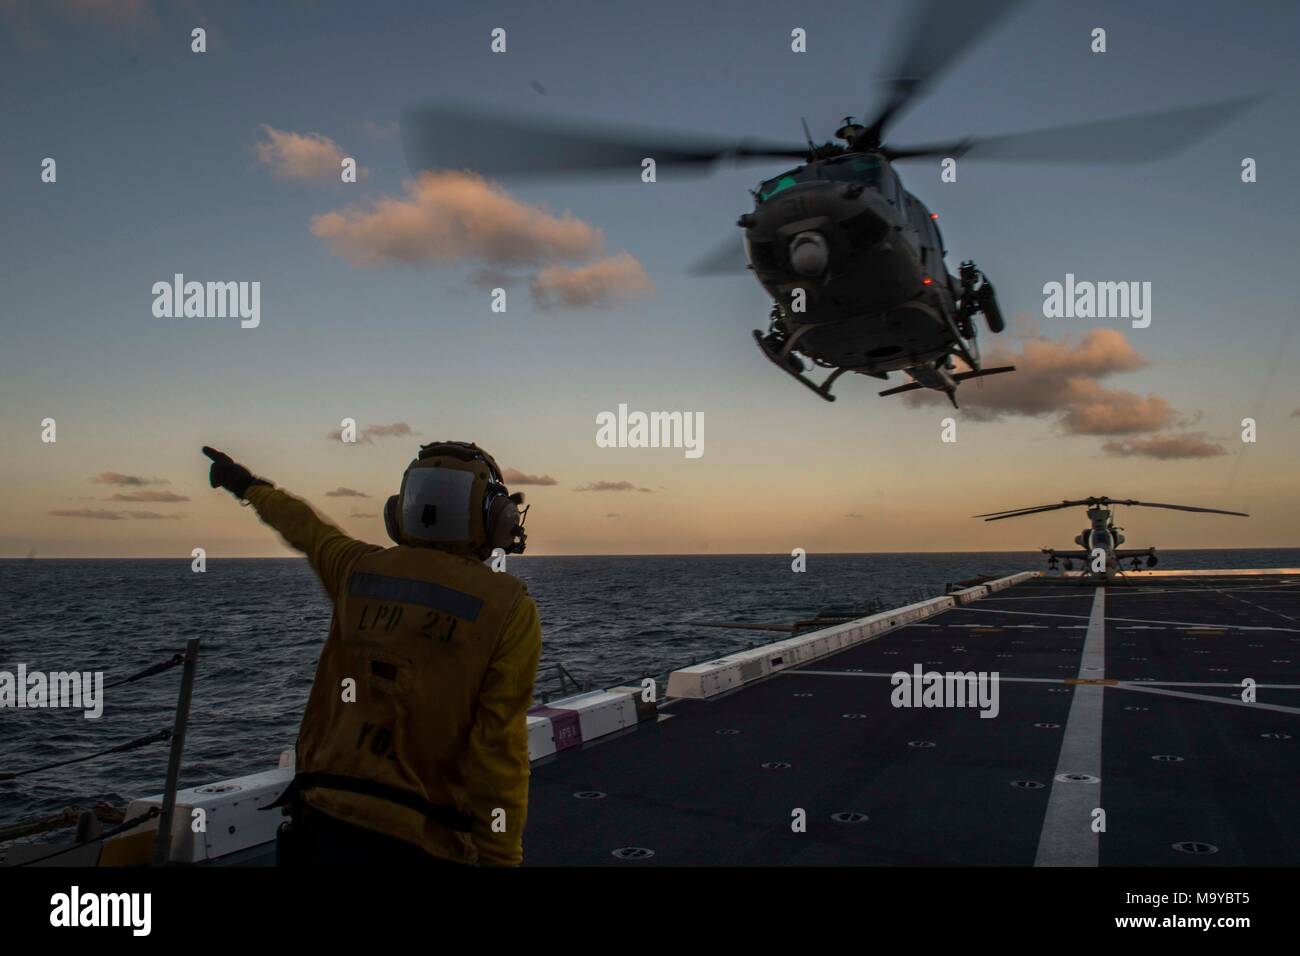 Aviation Support Equipment Technician 2nd Class Yun Zhang, from Los Angeles, Calif., signals to the pilot of a UH-1Y Venom from the Marine Light Attack Helicopter detachment of Marine Medium Tiltrotor Squadron 166 reinforced, the aviation combat element for the 13th Marine Expeditionary Unit (MEU), on the flight deck of the San Antonio-class amphibious transport dock USS Anchorage (LPD 23), during an amphibious squadron and MEU integration (PMINT) exercise. PMINT is a training evolution between Essex Amphibious Ready Group and 13th MEU, which allows Sailors and Marines to train as a cohesive u Stock Photo